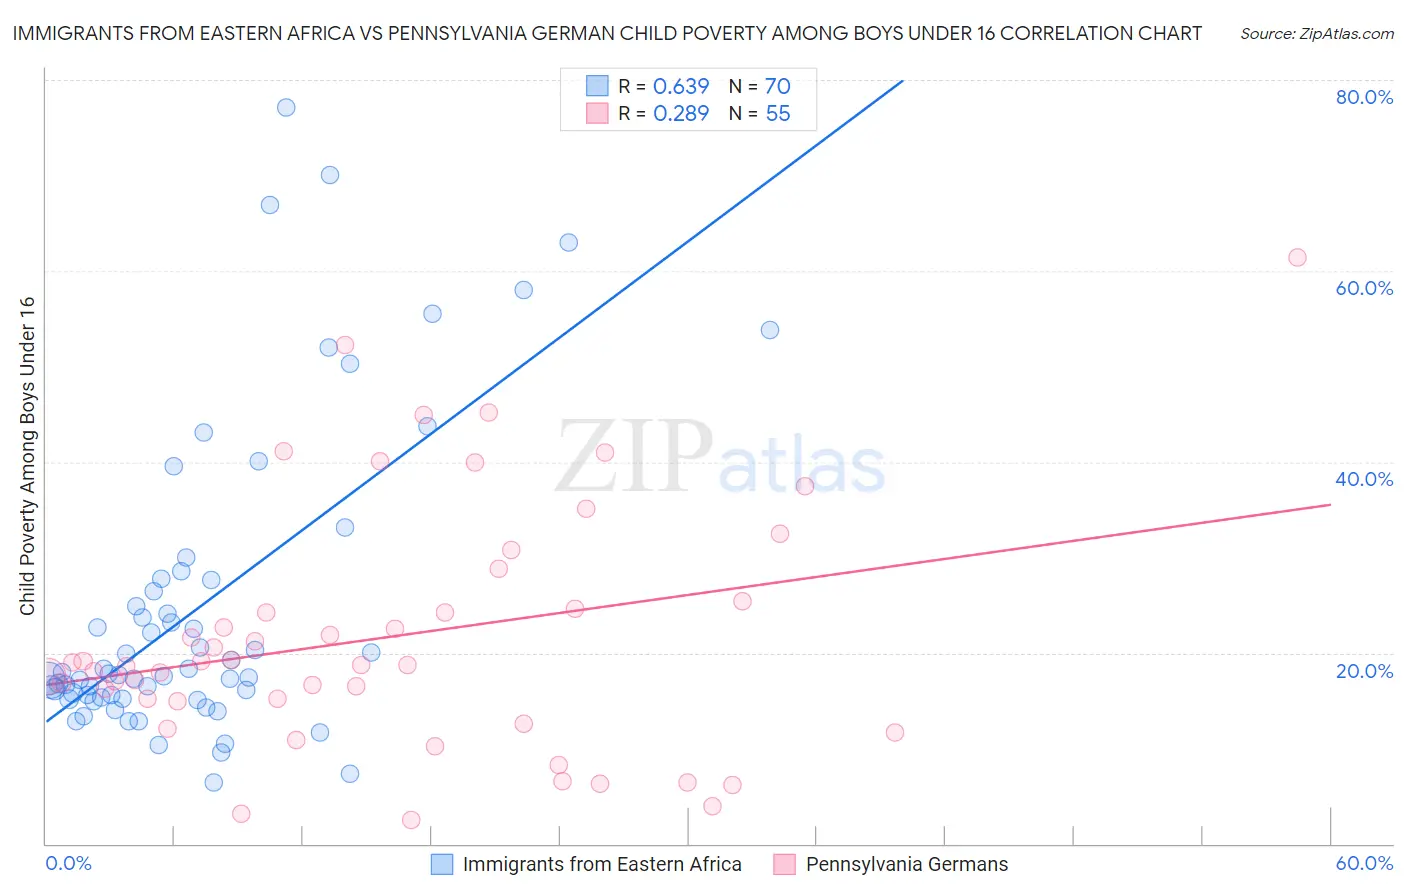 Immigrants from Eastern Africa vs Pennsylvania German Child Poverty Among Boys Under 16